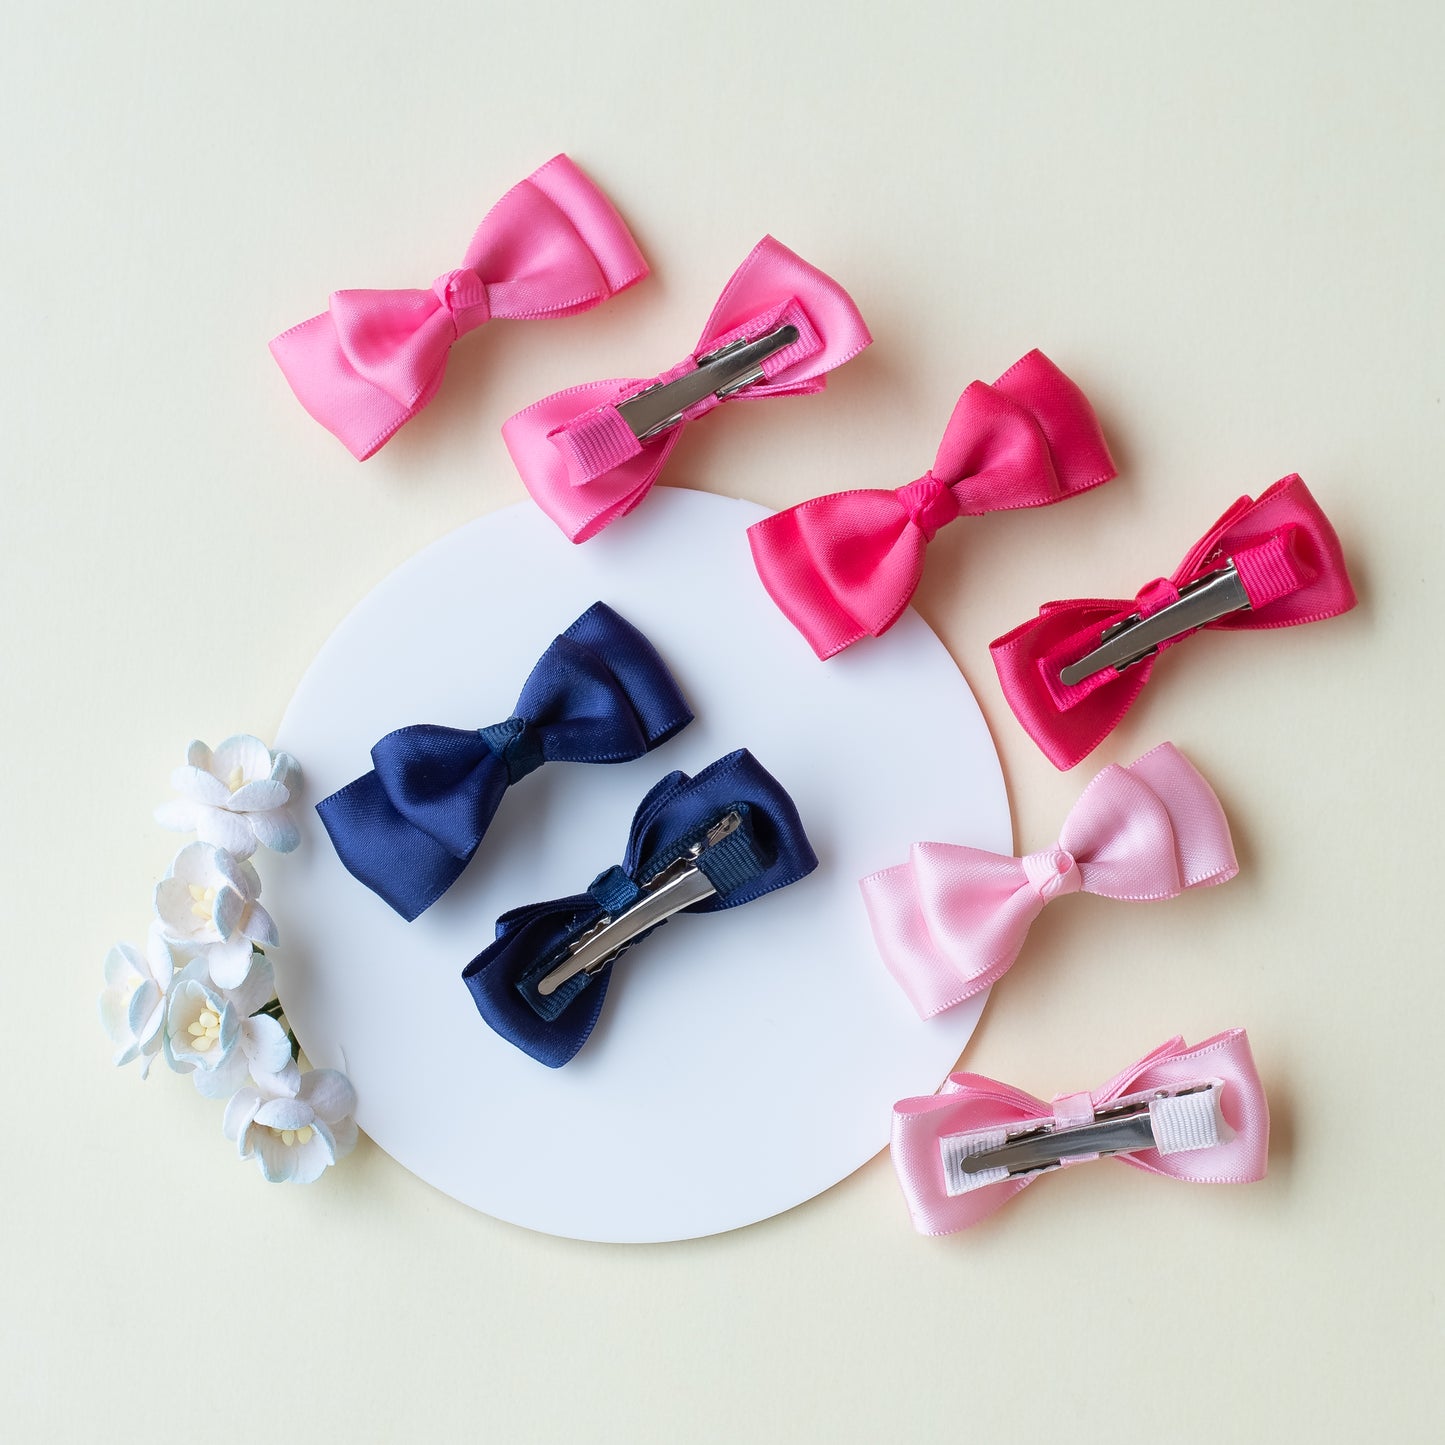 Combo: Fancy satin double bow alligator clips (8 nos) - Pink, Blue